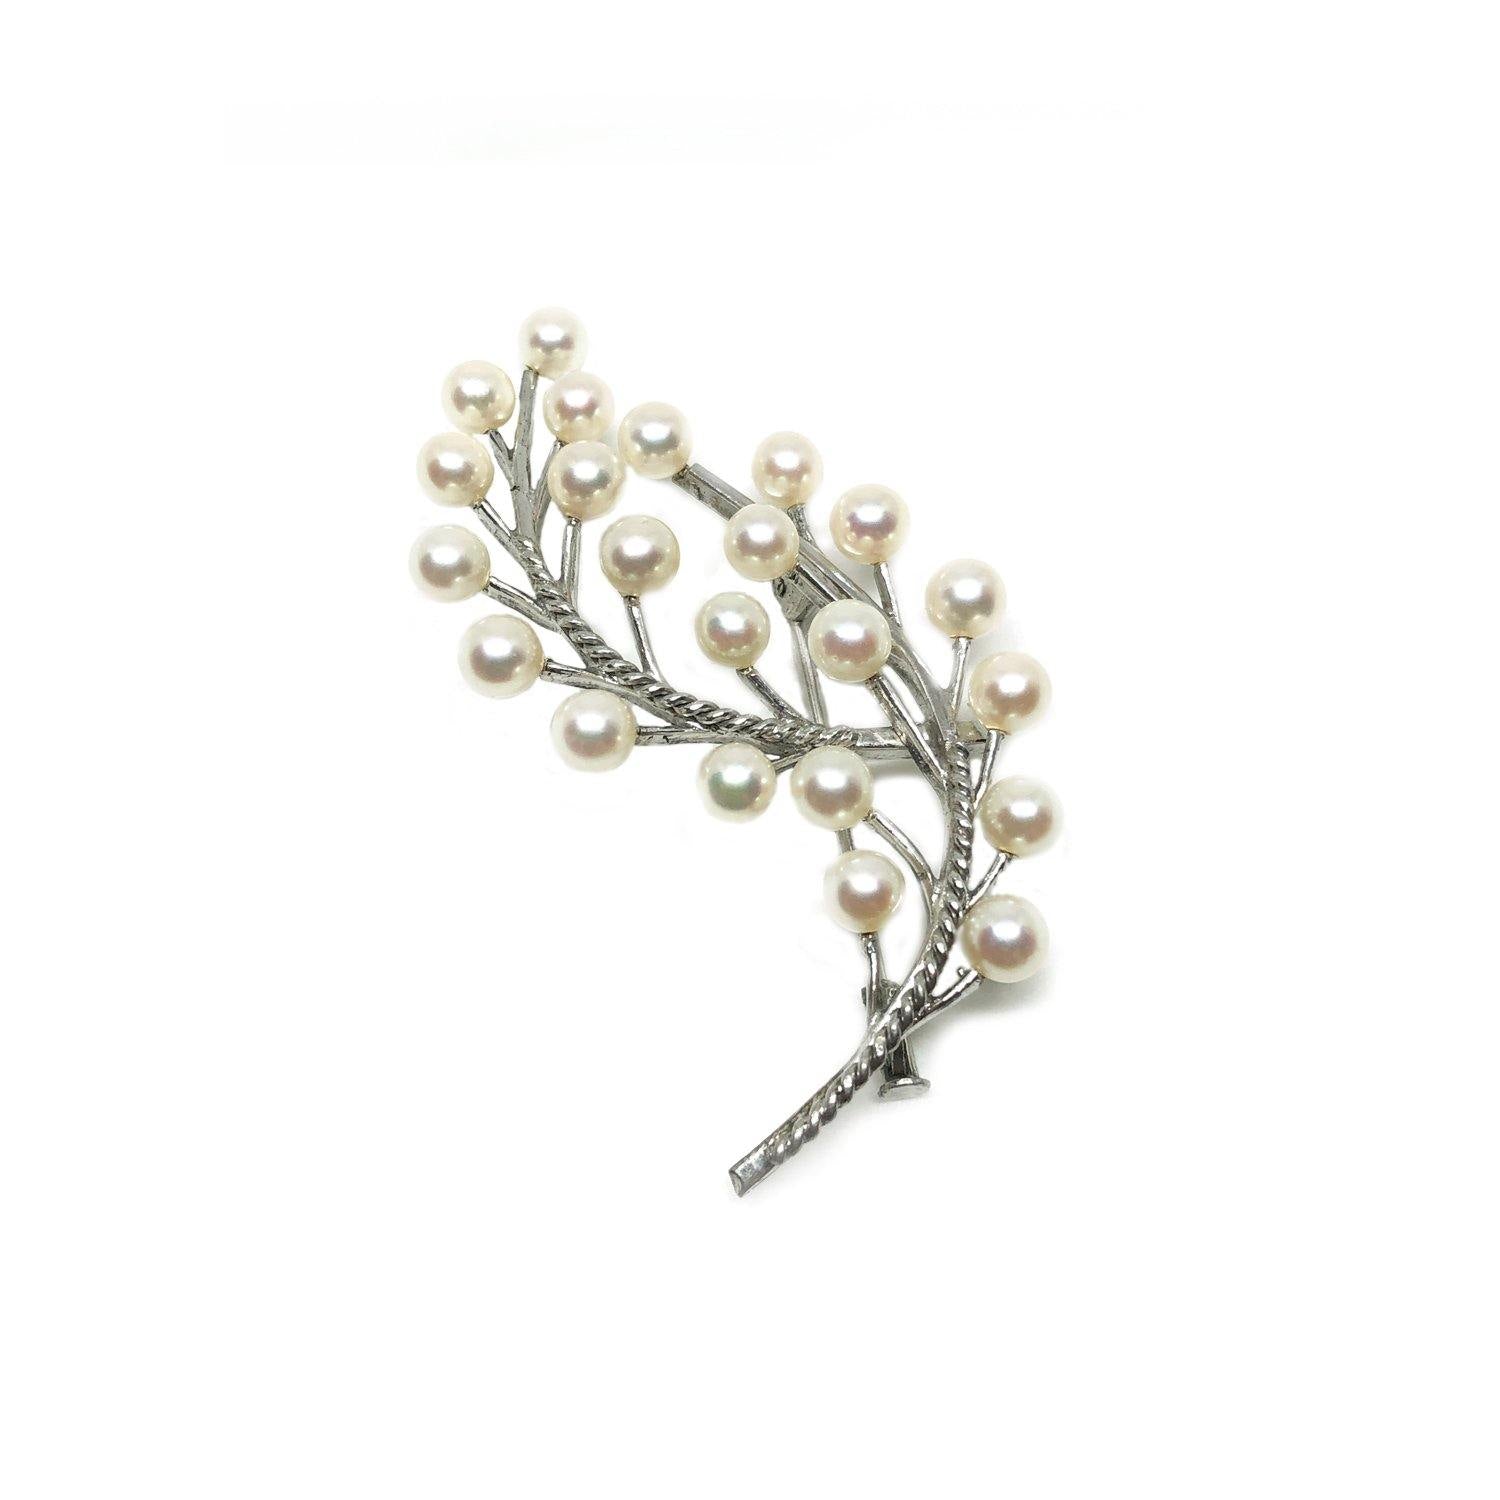 Braided Branch Japanese Akoya Cultured Saltwater Pearl Floral Brooch- Sterling Silver